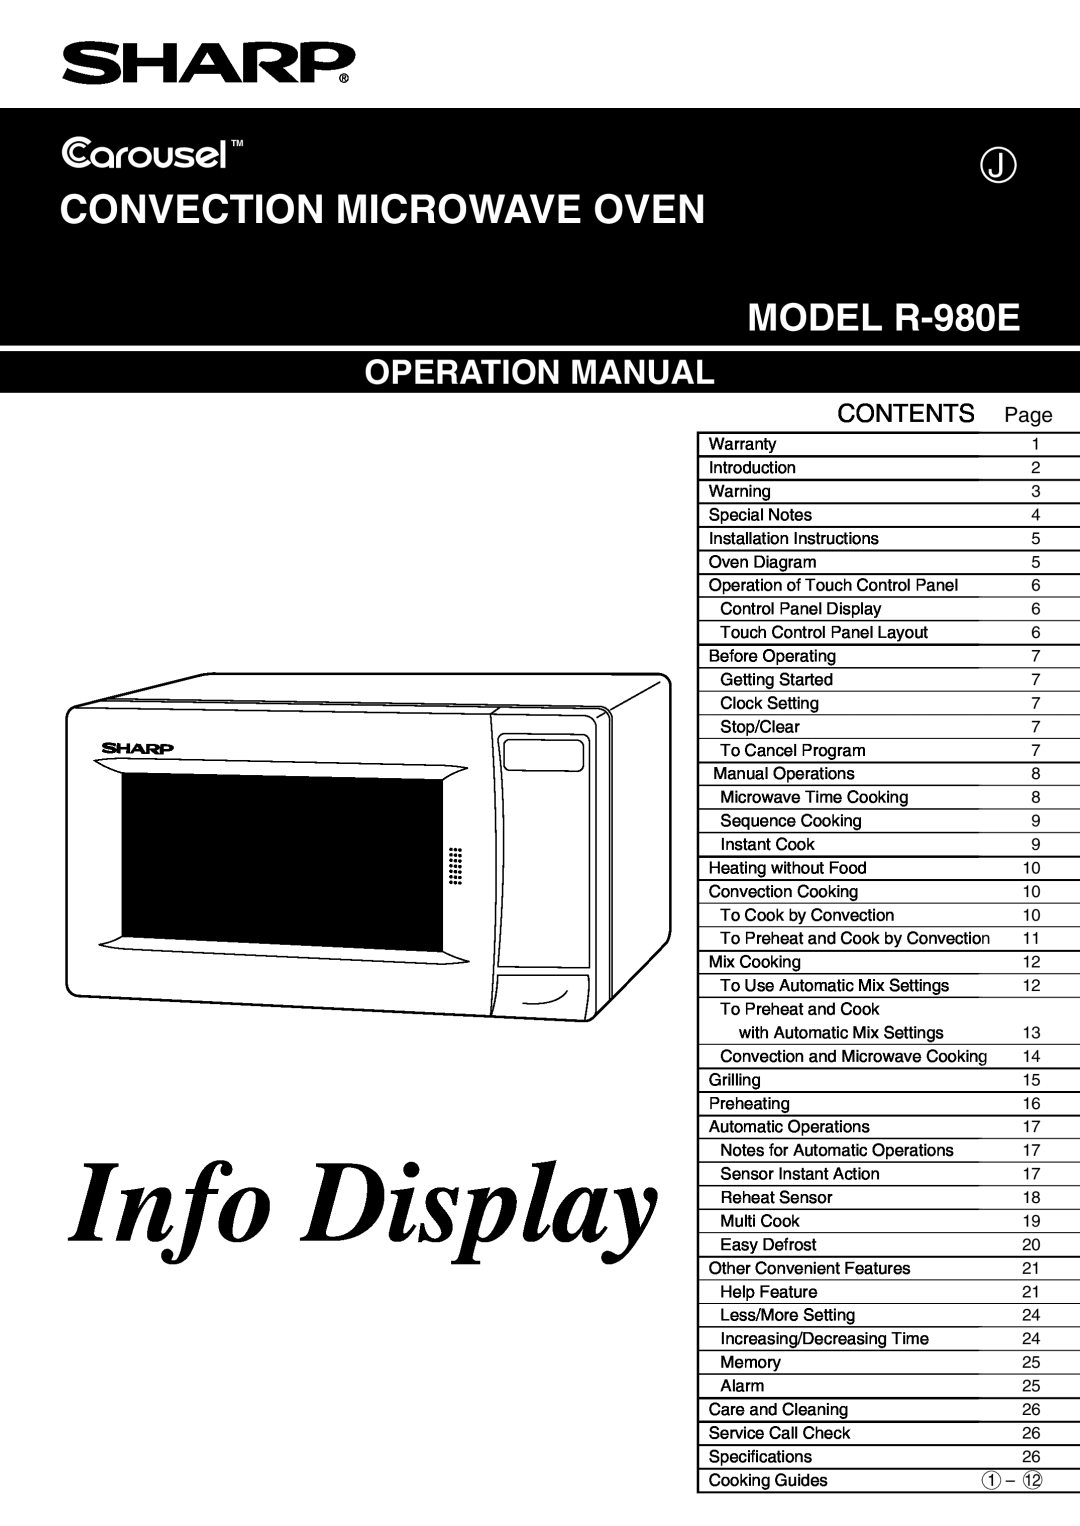 Sharp operation manual Page, Info Display, Convection Microwave Oven, MODEL R-980E, Contents 